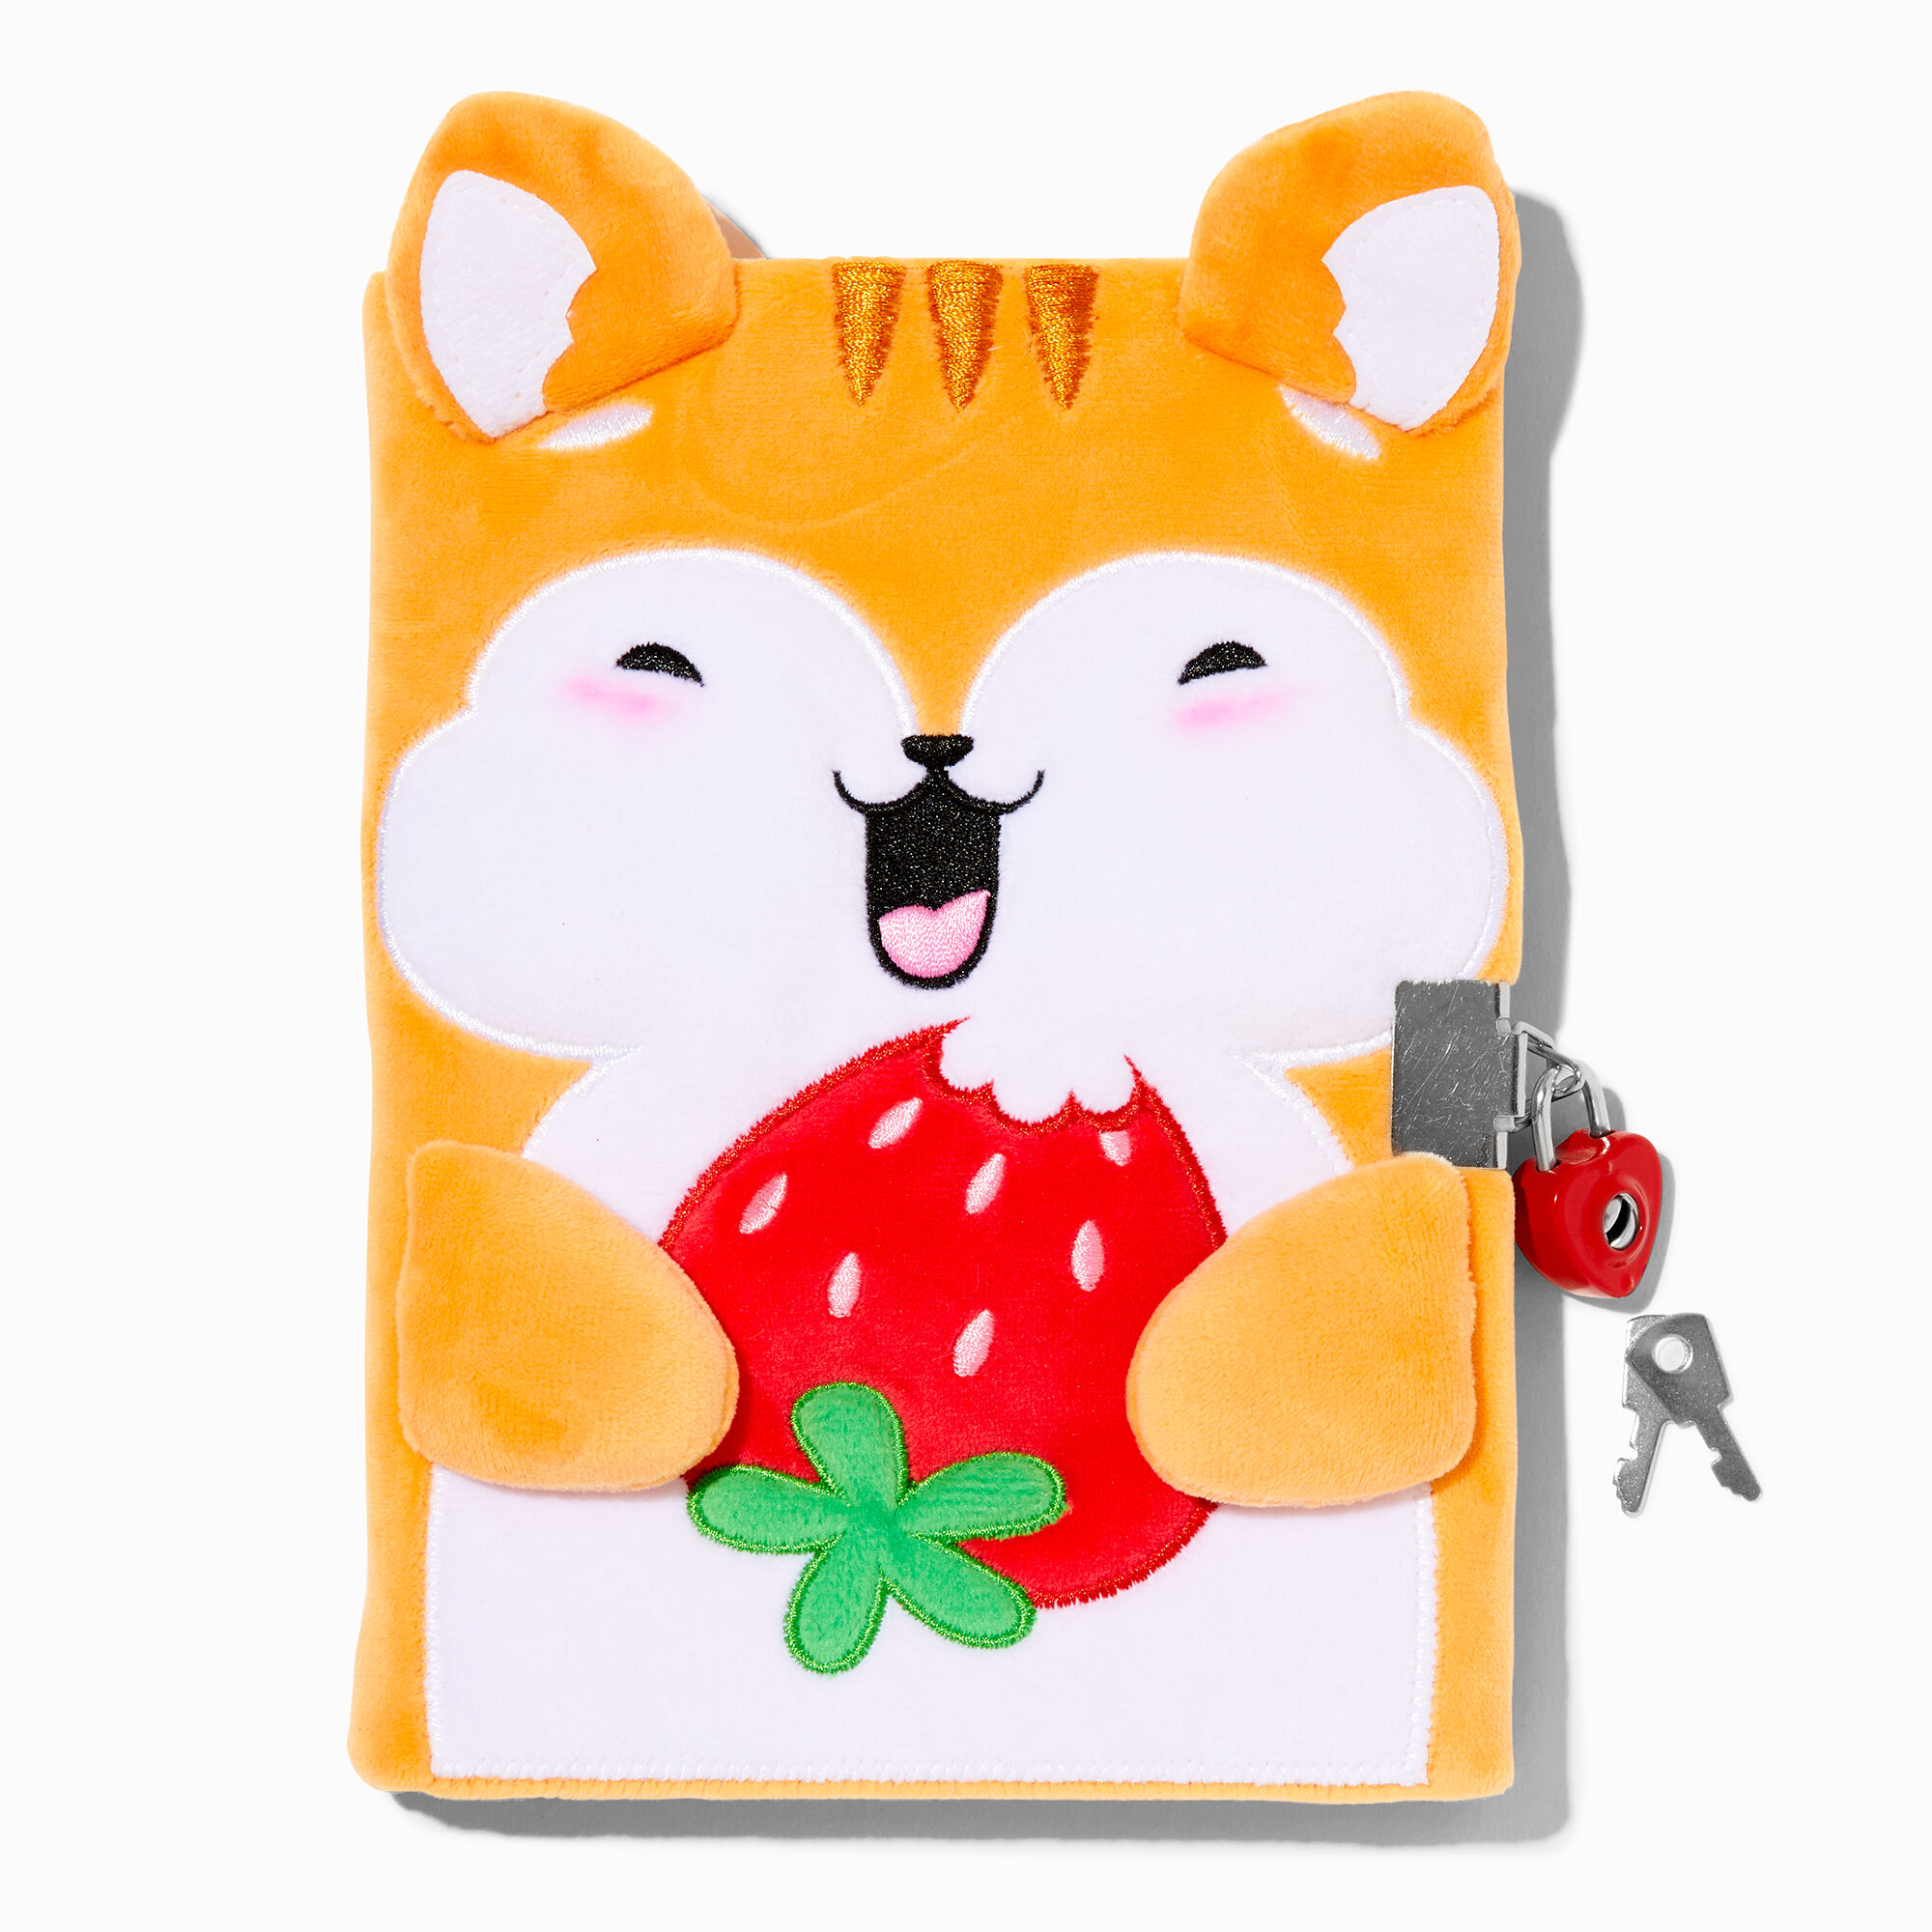 View Claires Strawberry Chipmunk Lock Diary information